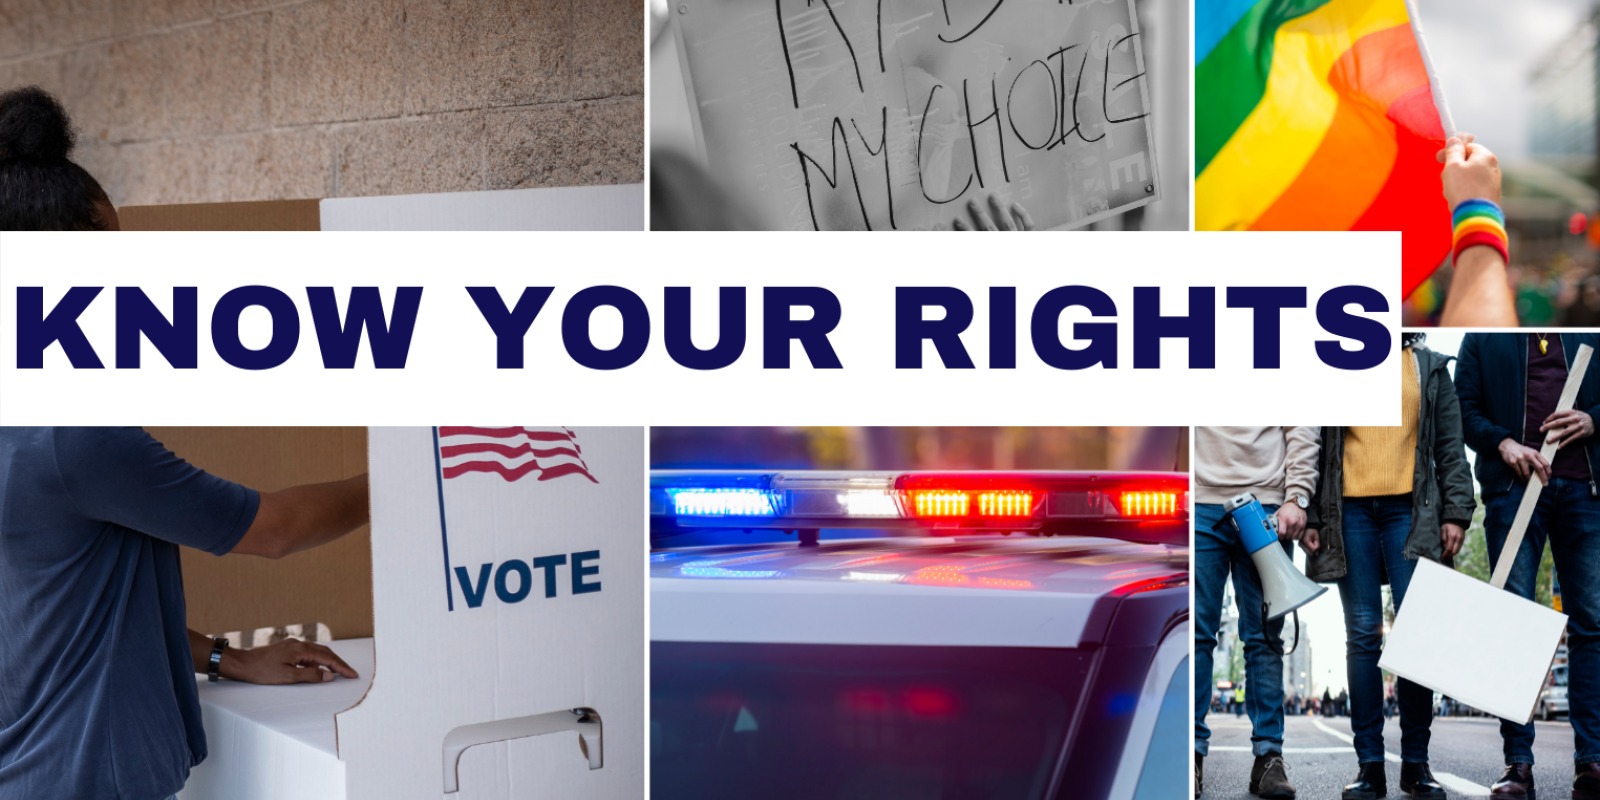 Graphic reads "Know Your Rights" featuring a photo of someone voting, a reproductive freedom protestor, a police car, LGBTQ+ flag, and protestors.